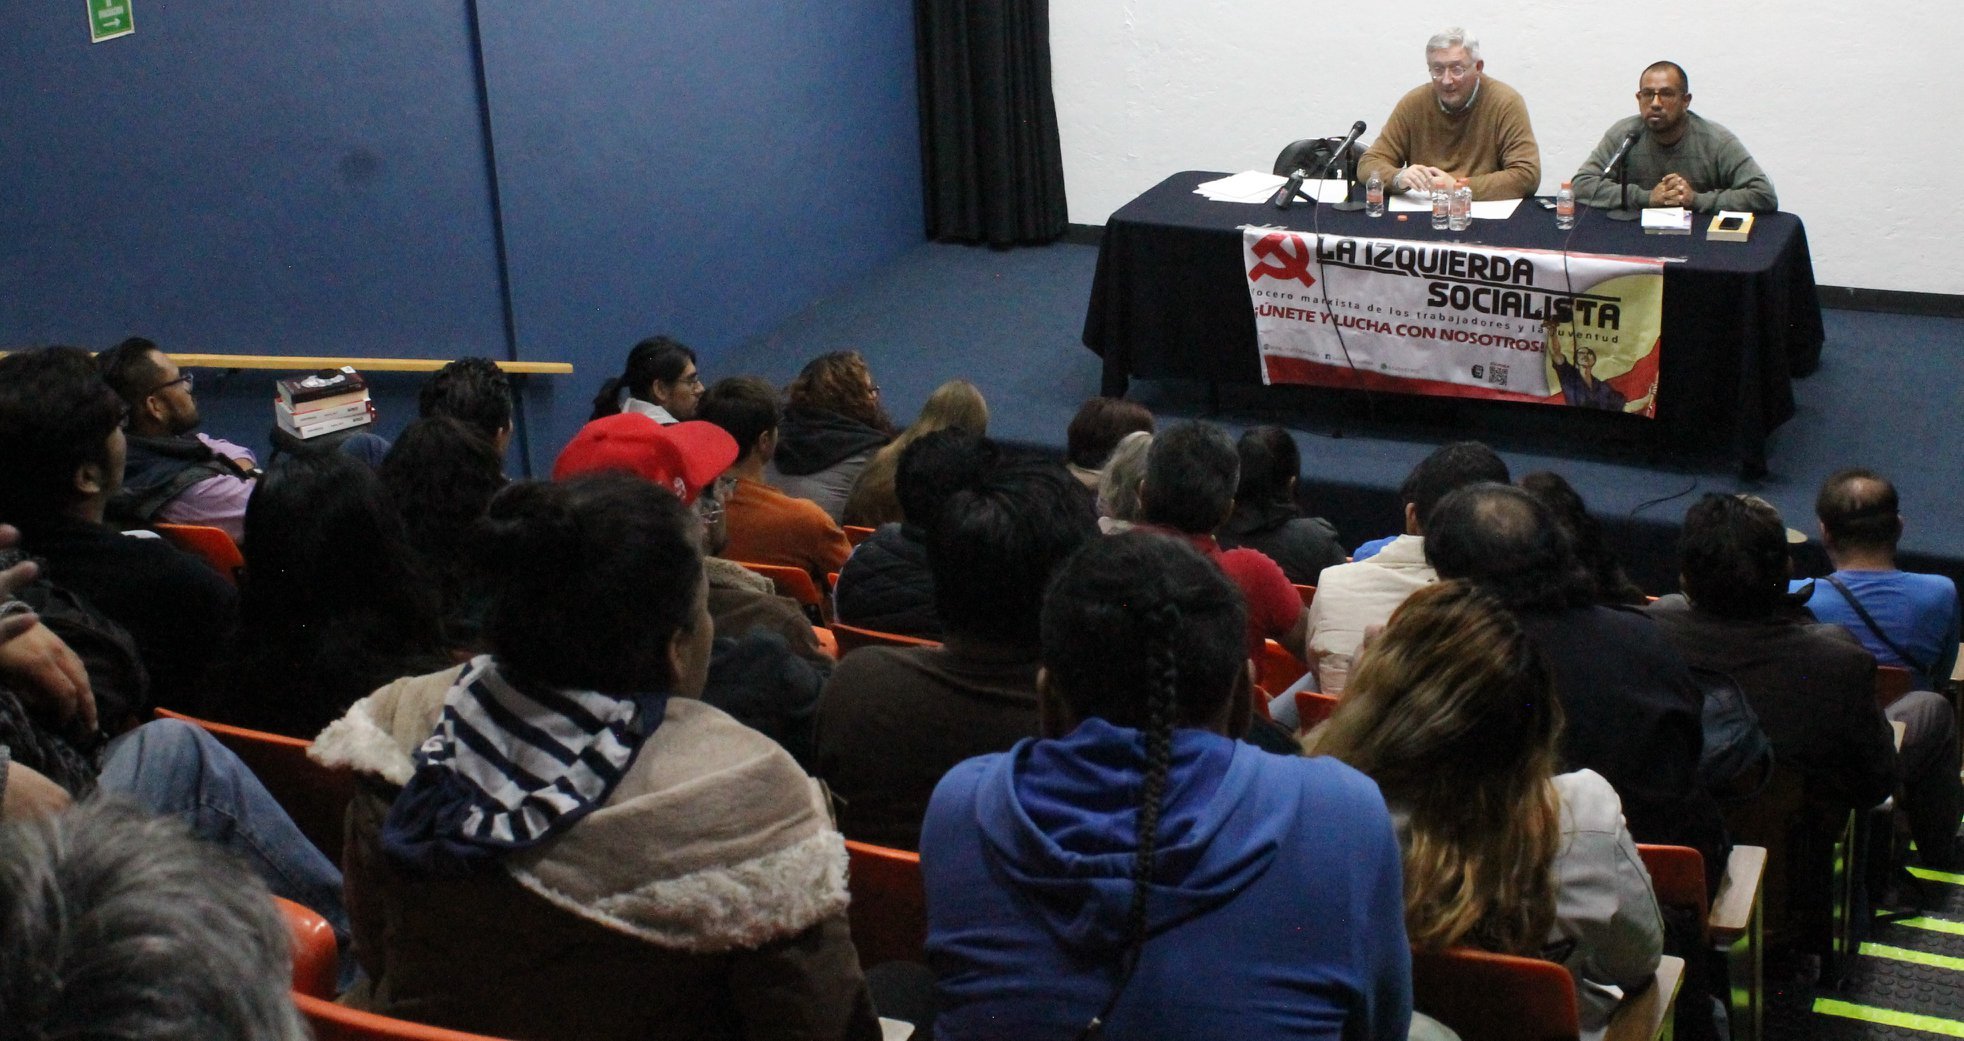 There was great interest in the talk on the relevance of Marxism Image La Izquierda Socialista